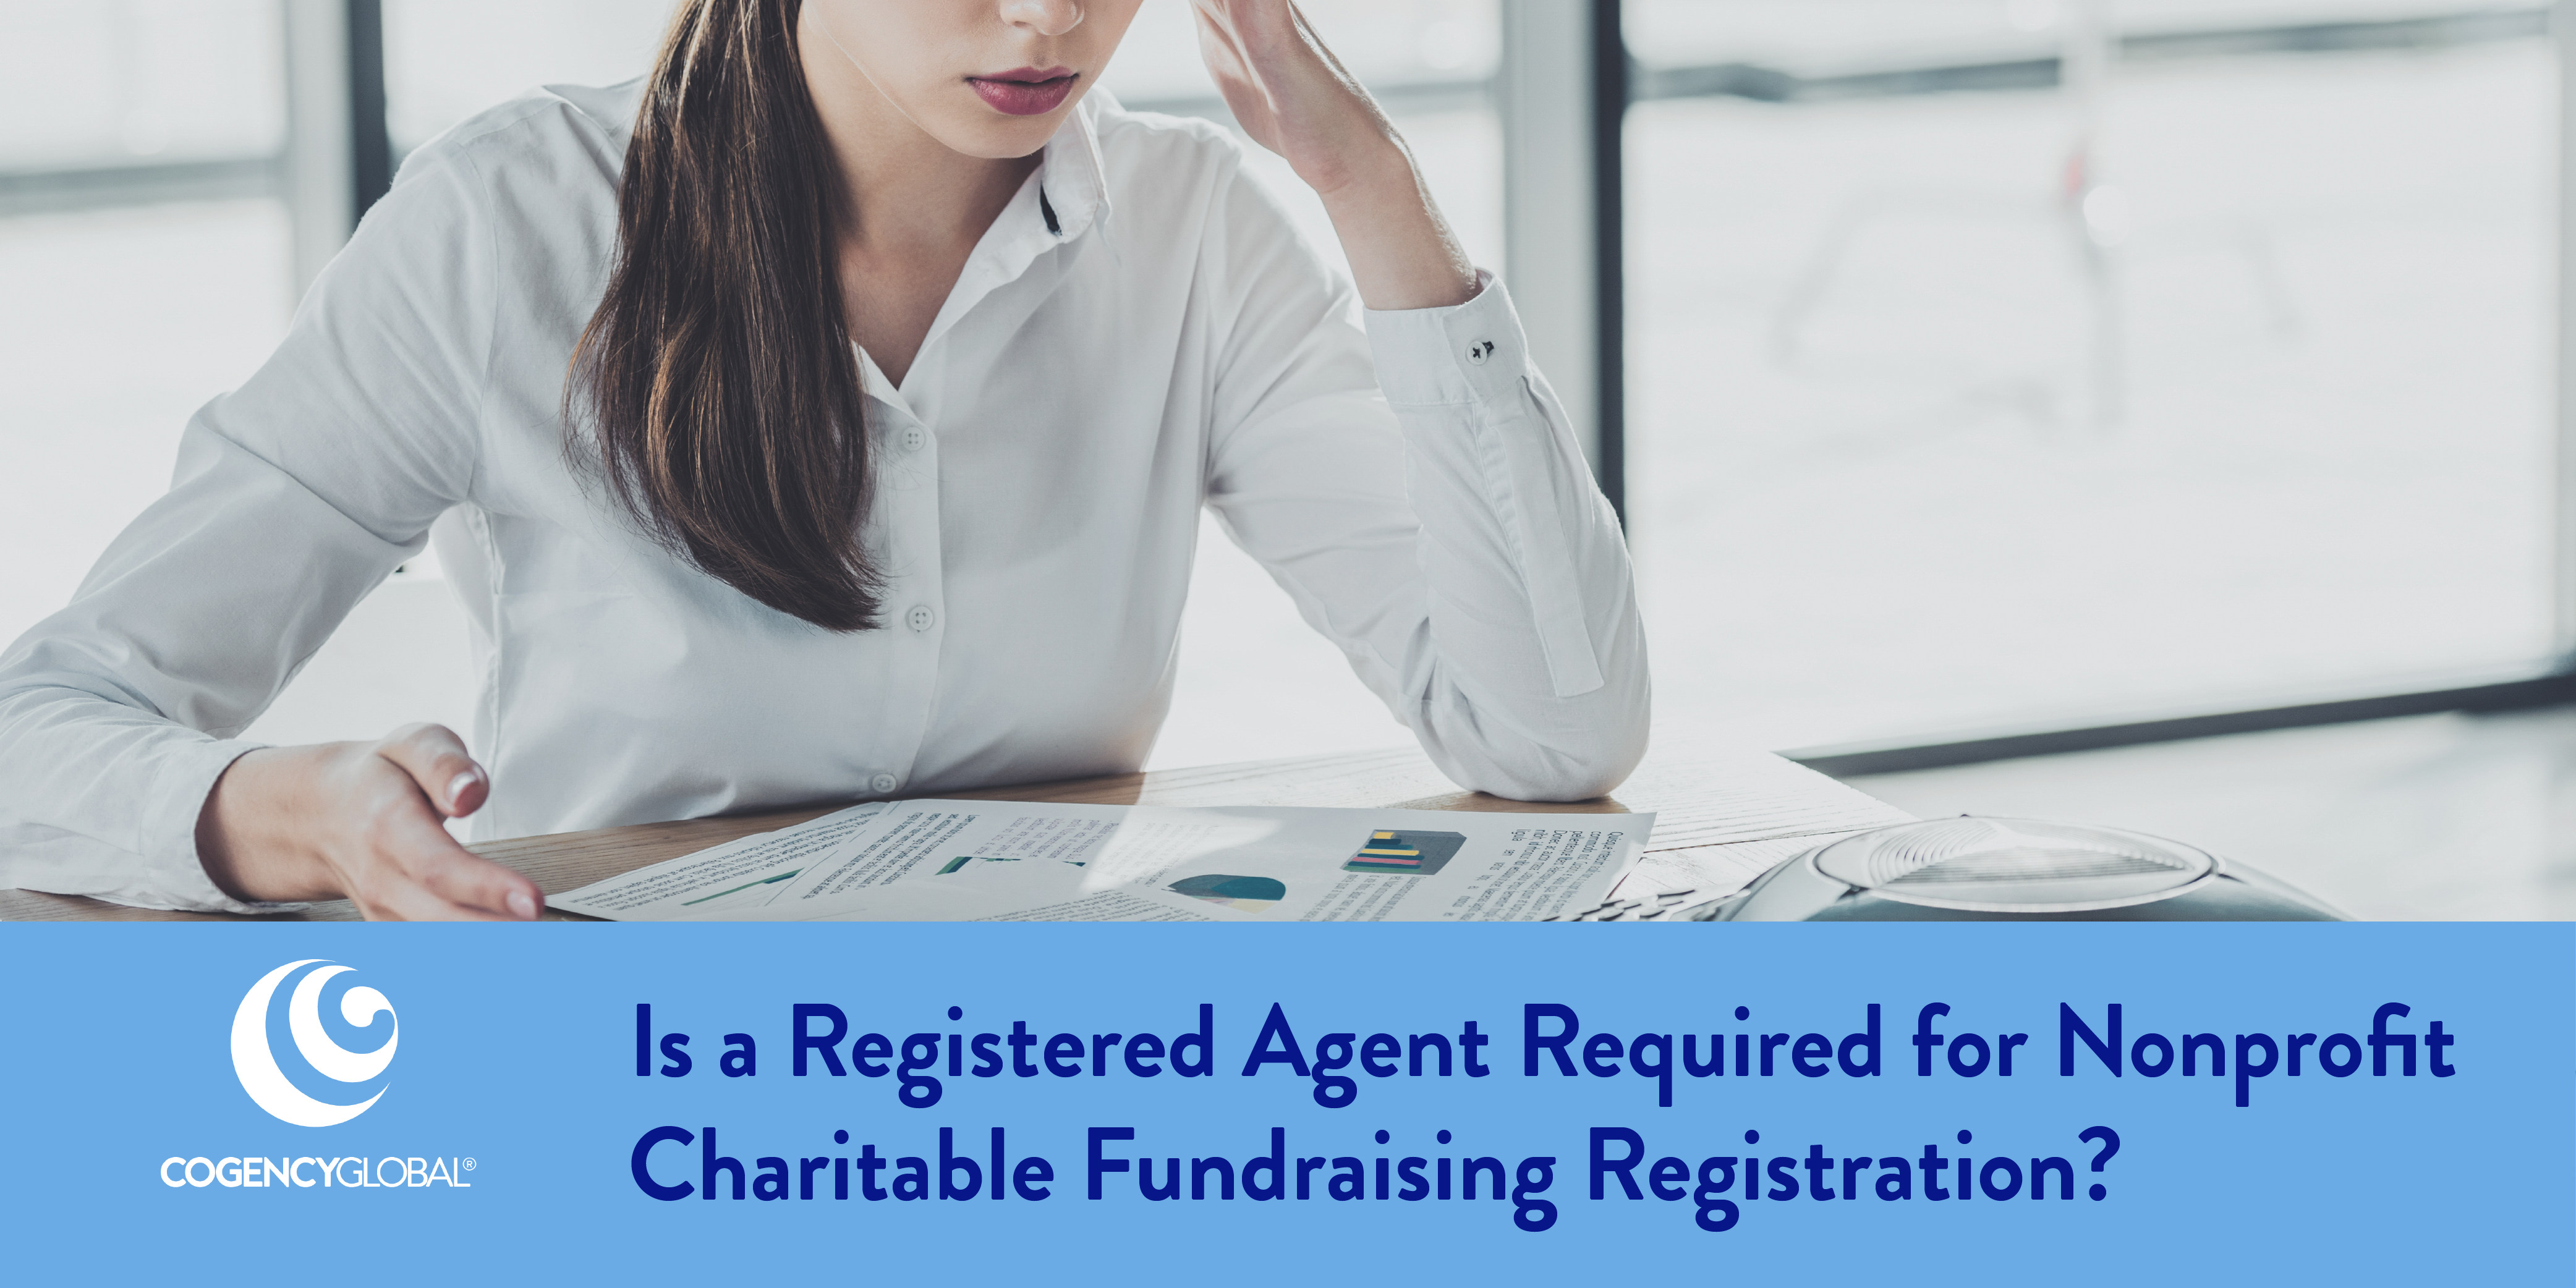 Is a Registered Agent Required for Nonprofit Charitable Fundraising Registration?